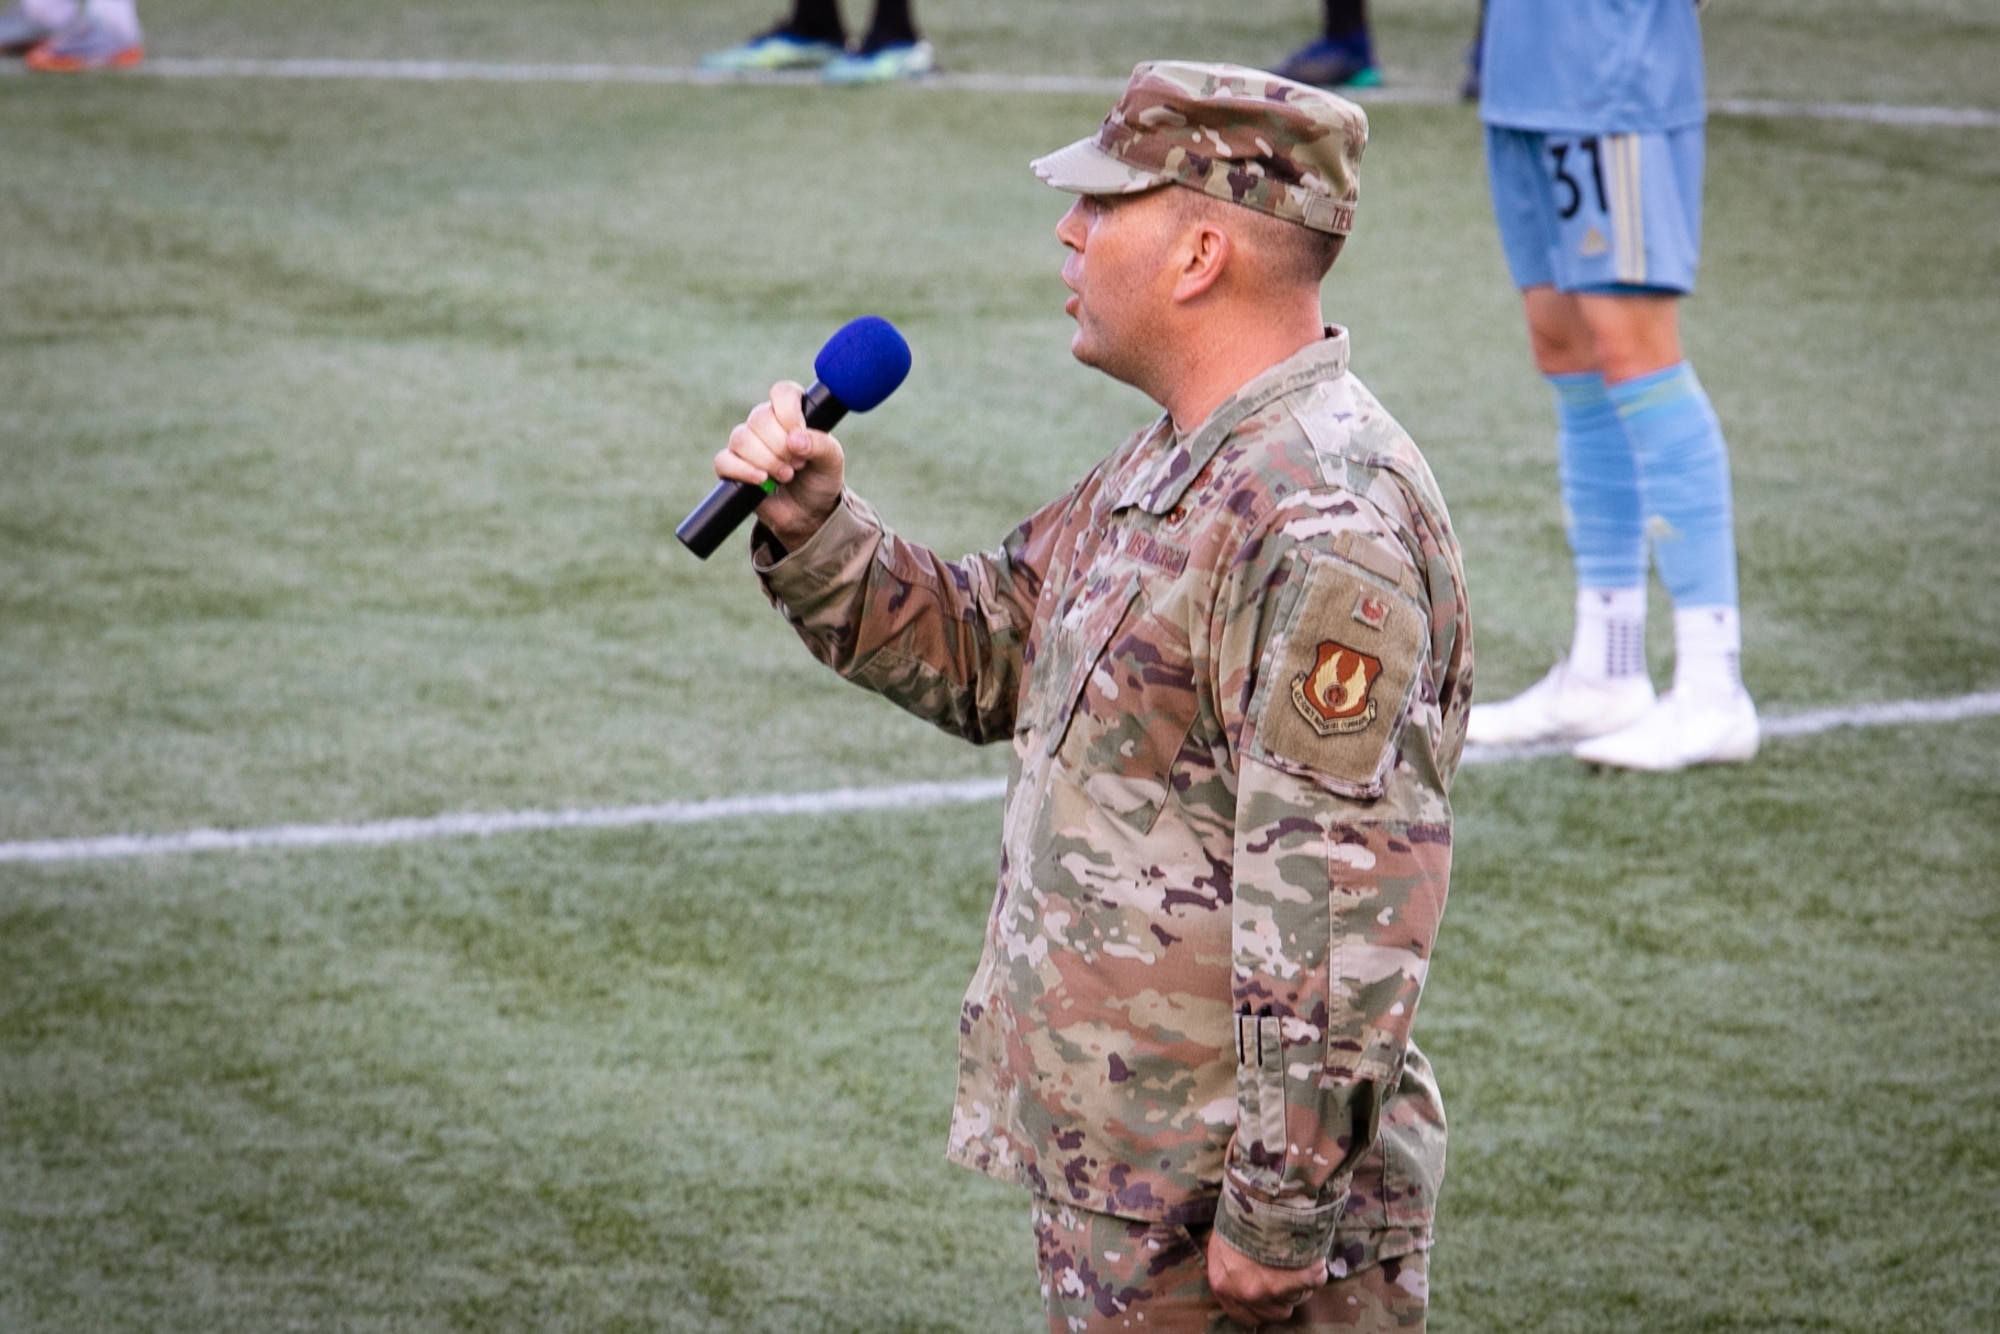 Air Force Colonel singing National Anthem on field.